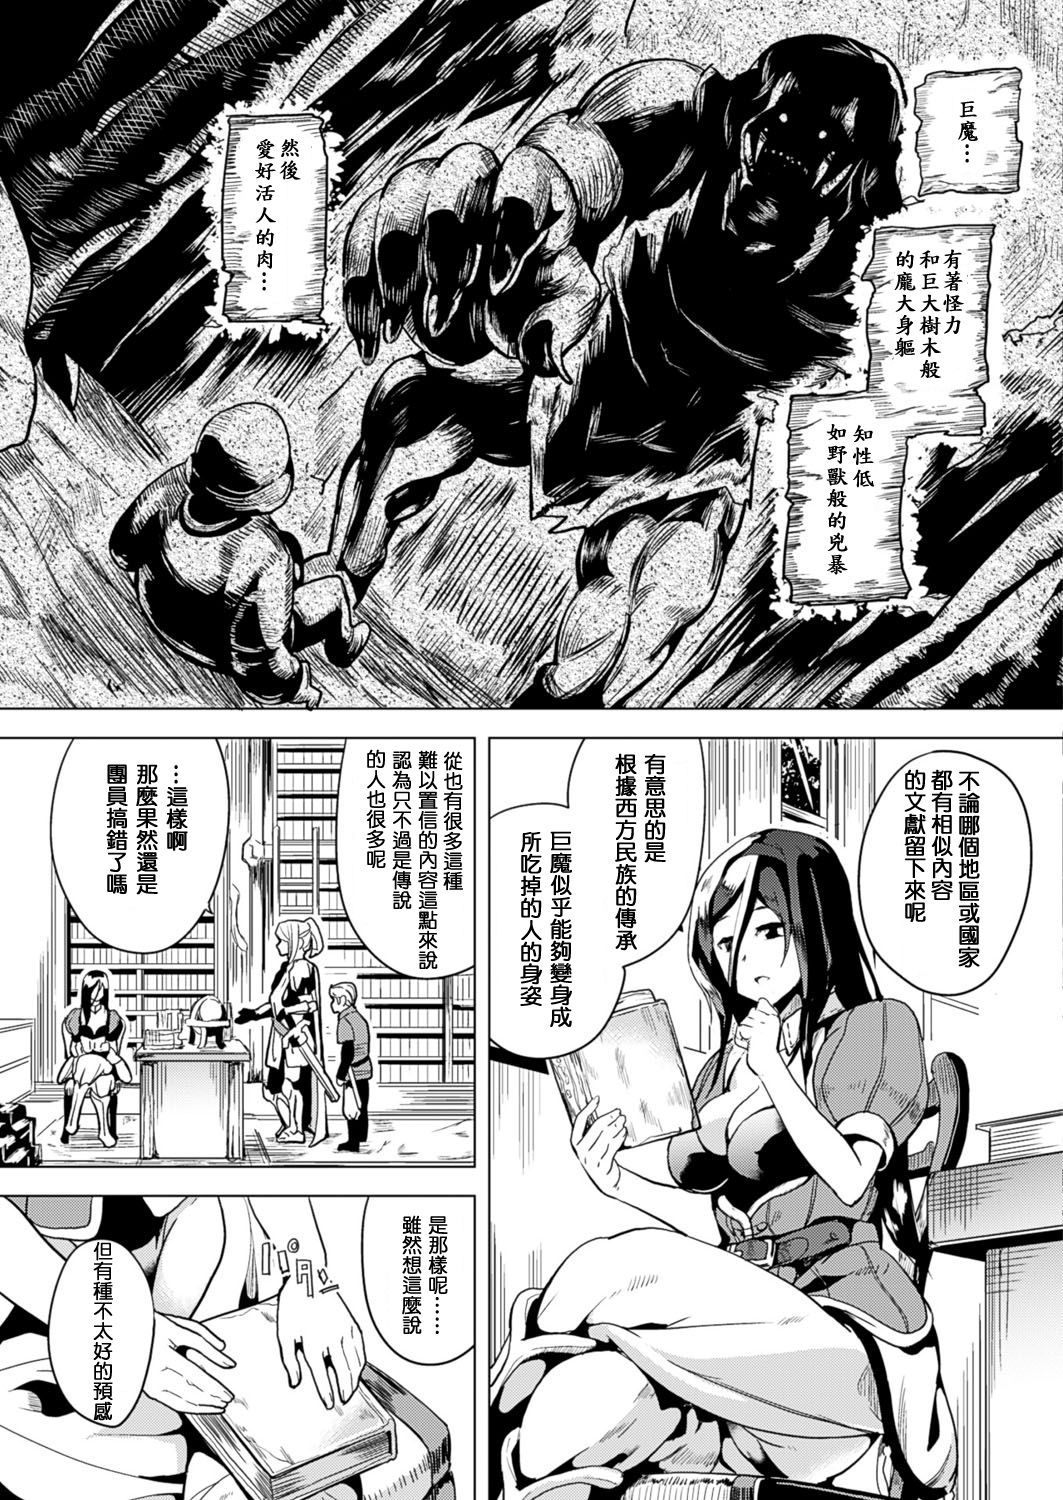 [DATE] OGRE #2 (COMIC Unreal 2016-12 Vol. 64) [Chinese] [風過迴廊個人漢化] [Digital] page 3 full